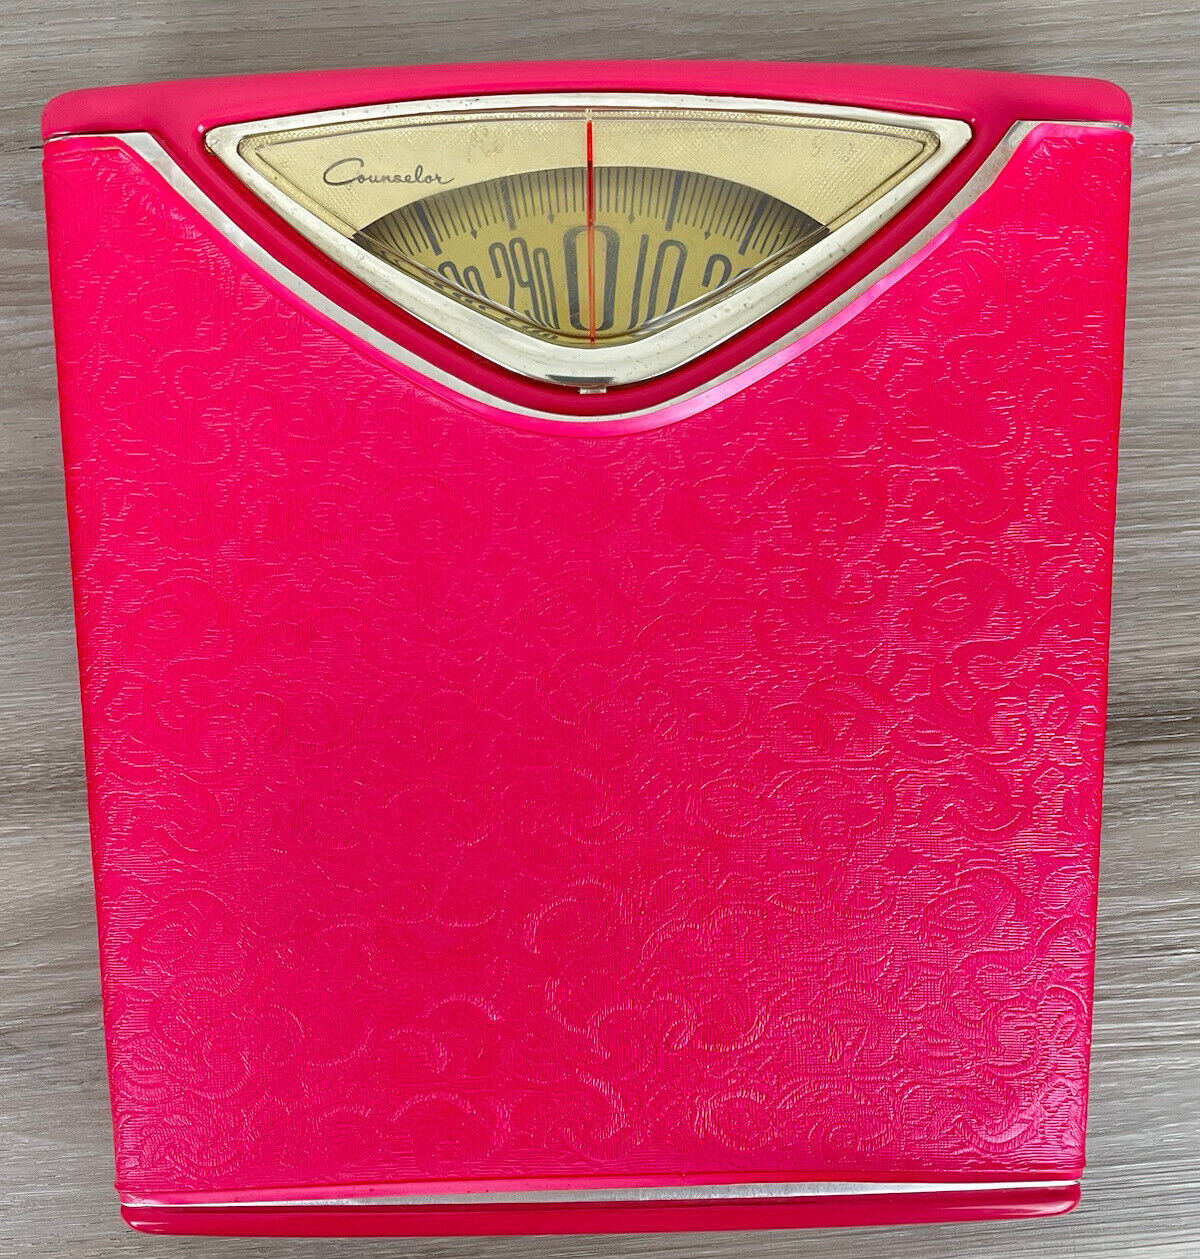 Vintage MCM Hot Pink and Gold Counselor Bathroom Scale The Brearley Company